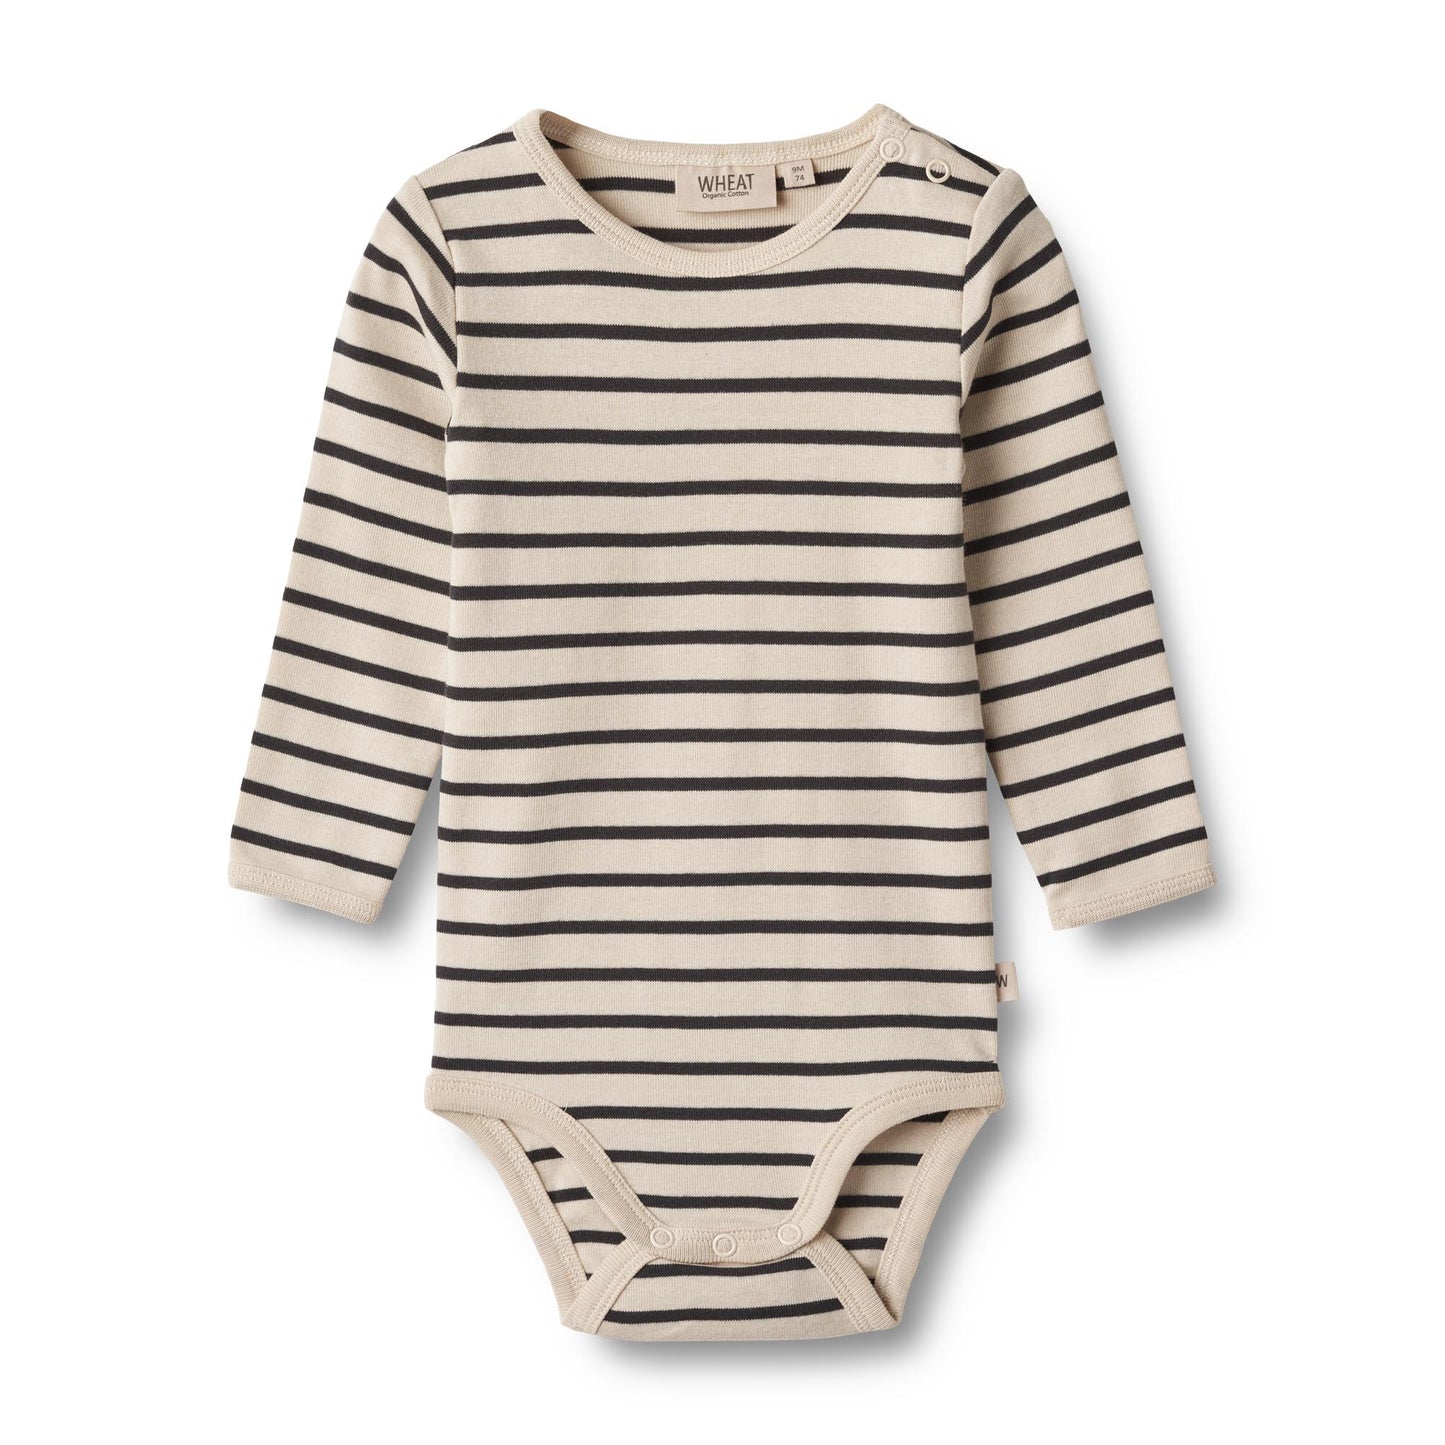 comfortale organic cotton navy striped body prefect for layering